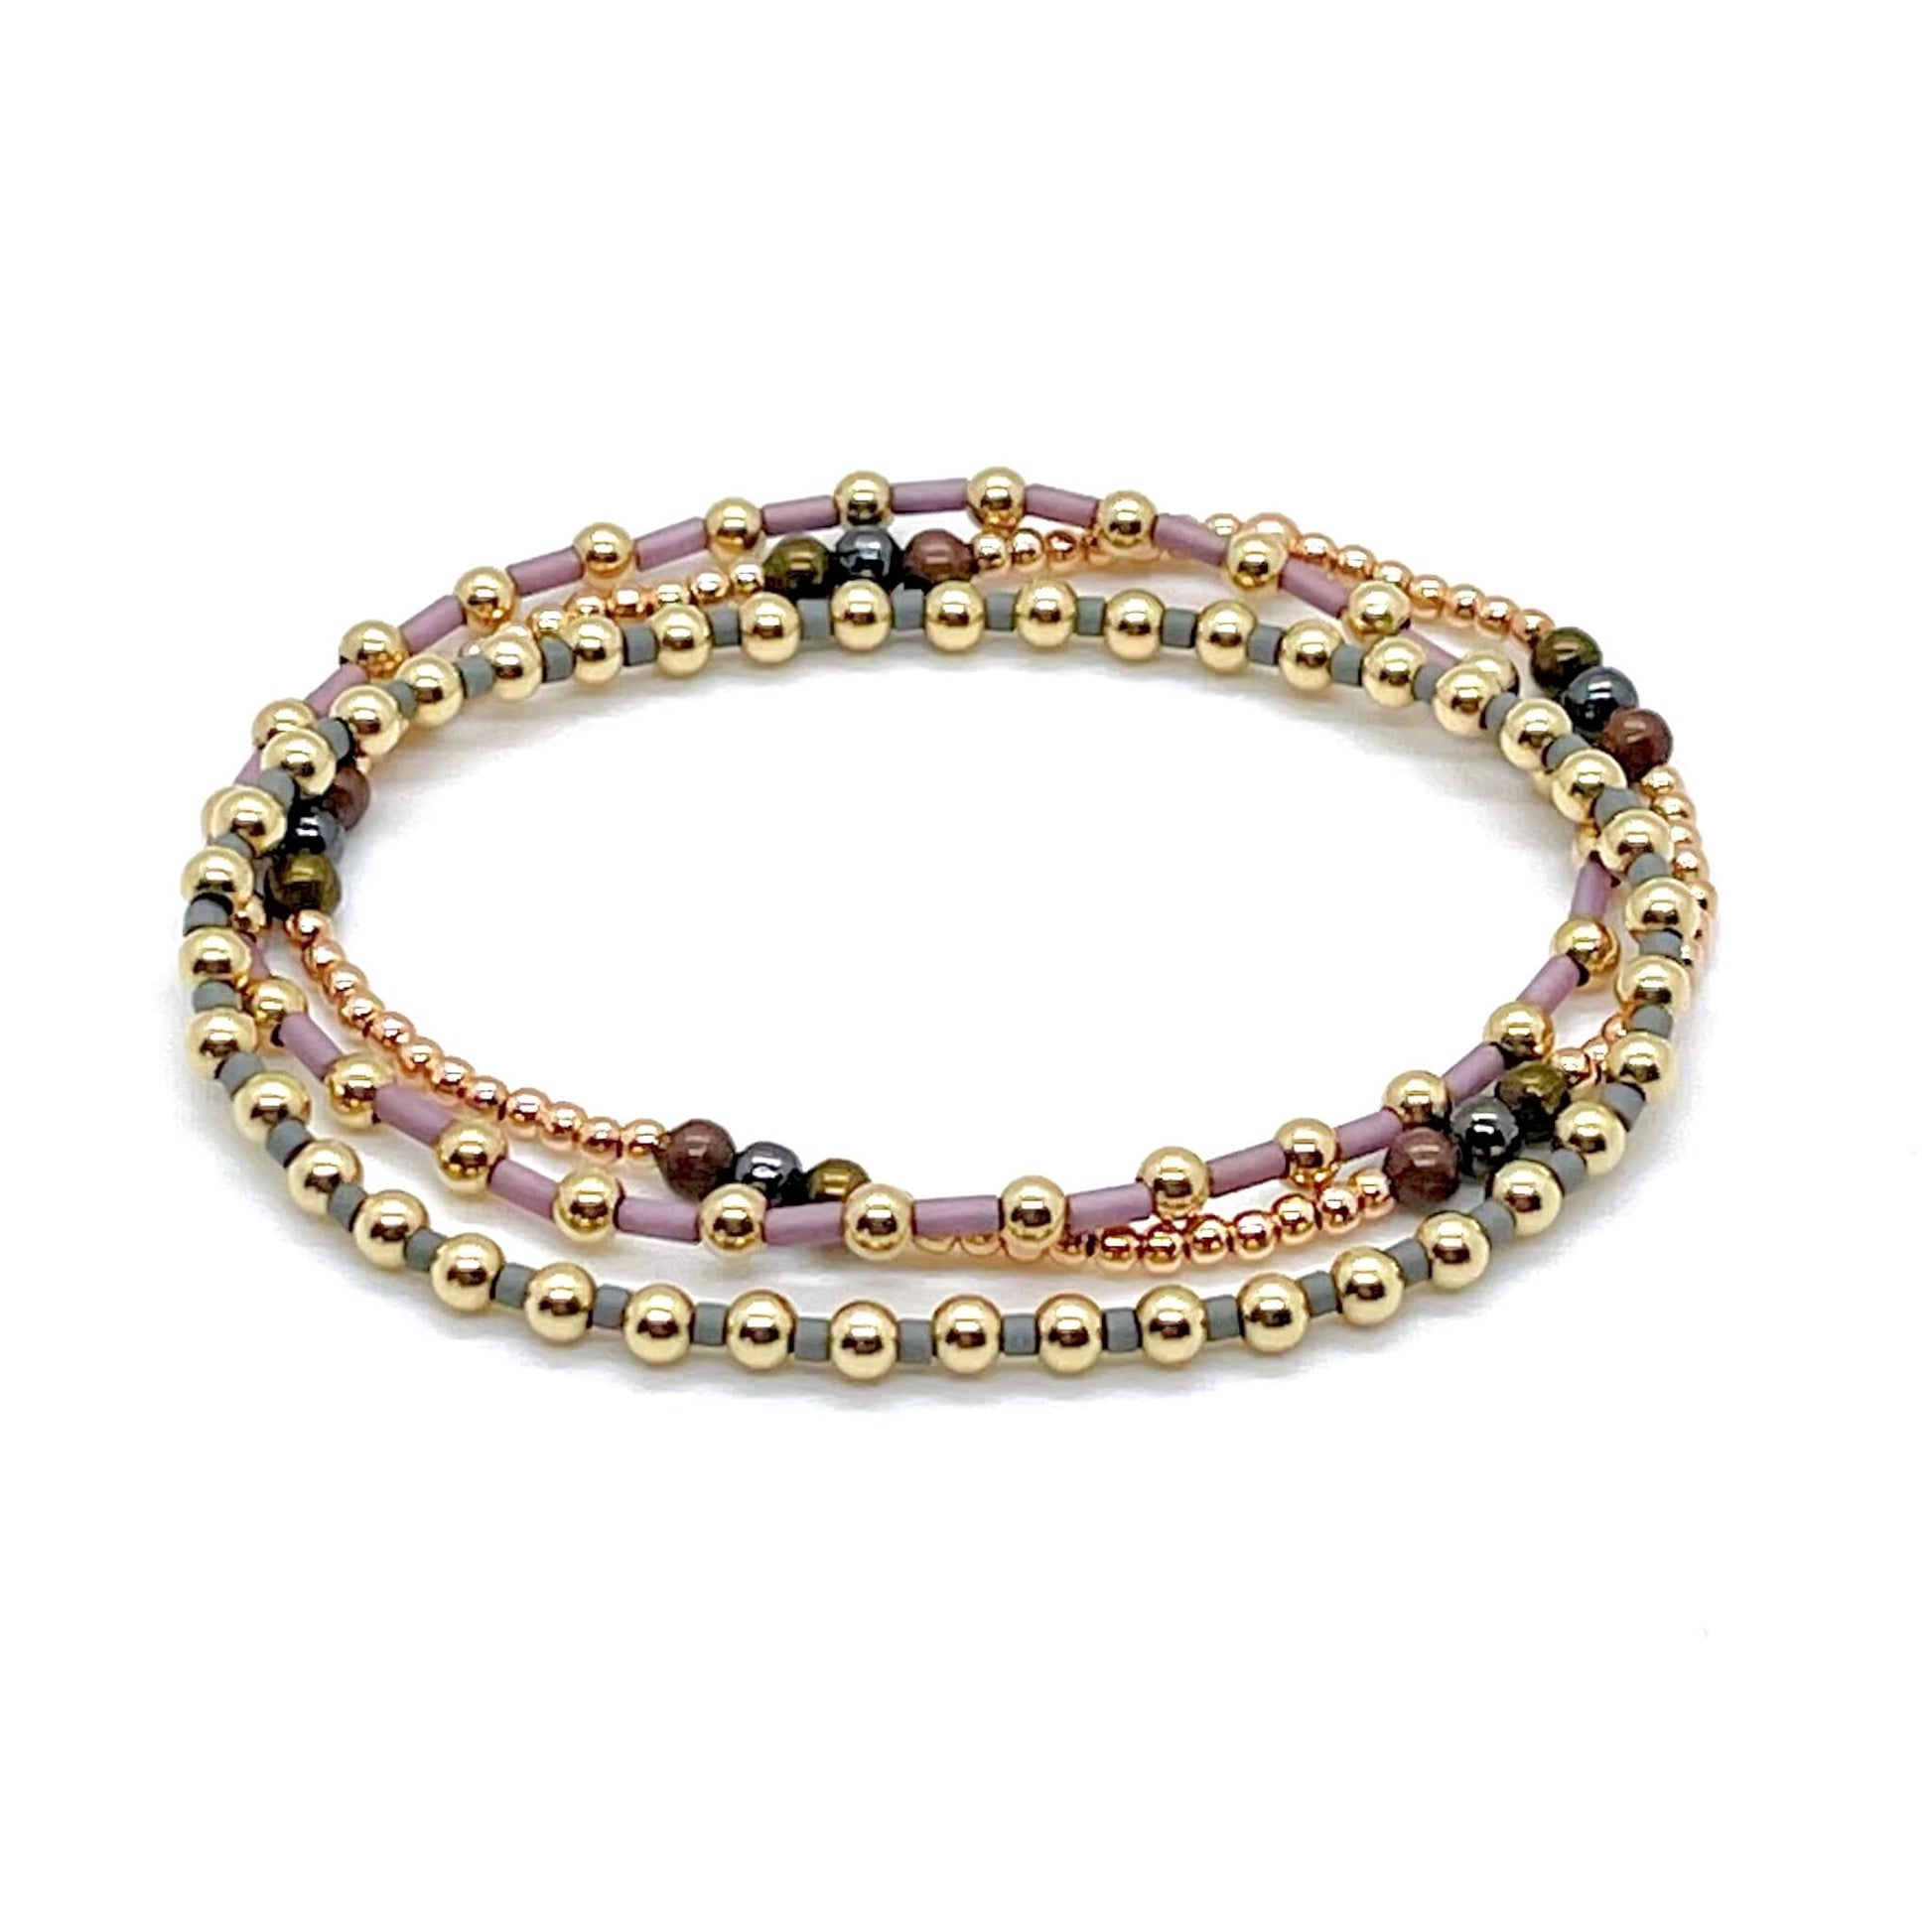 Gold beaded stretch bracelet trio with grey, purple, bronze, and gunmetal accent beads. 